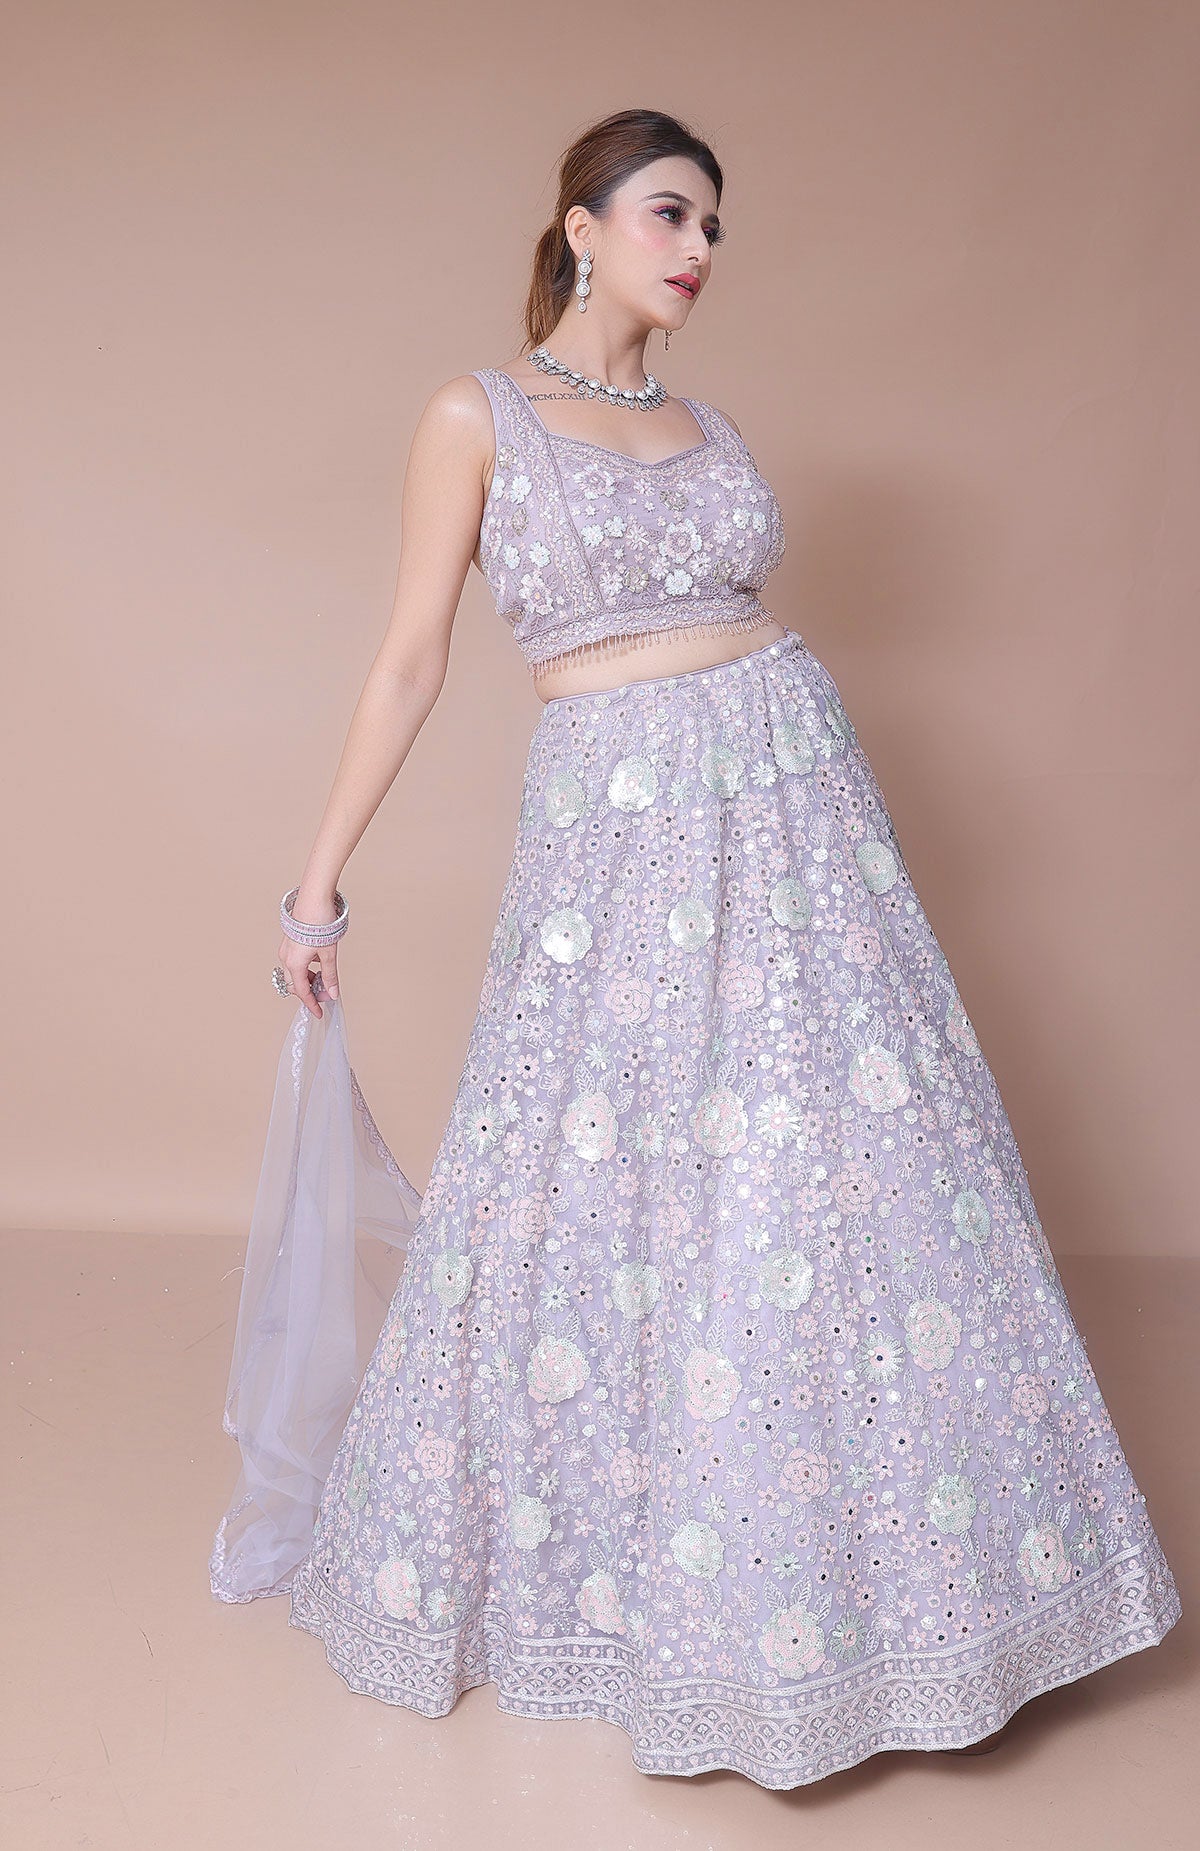 Lavender Lehenga Choli in Net embellished with hand embroidery